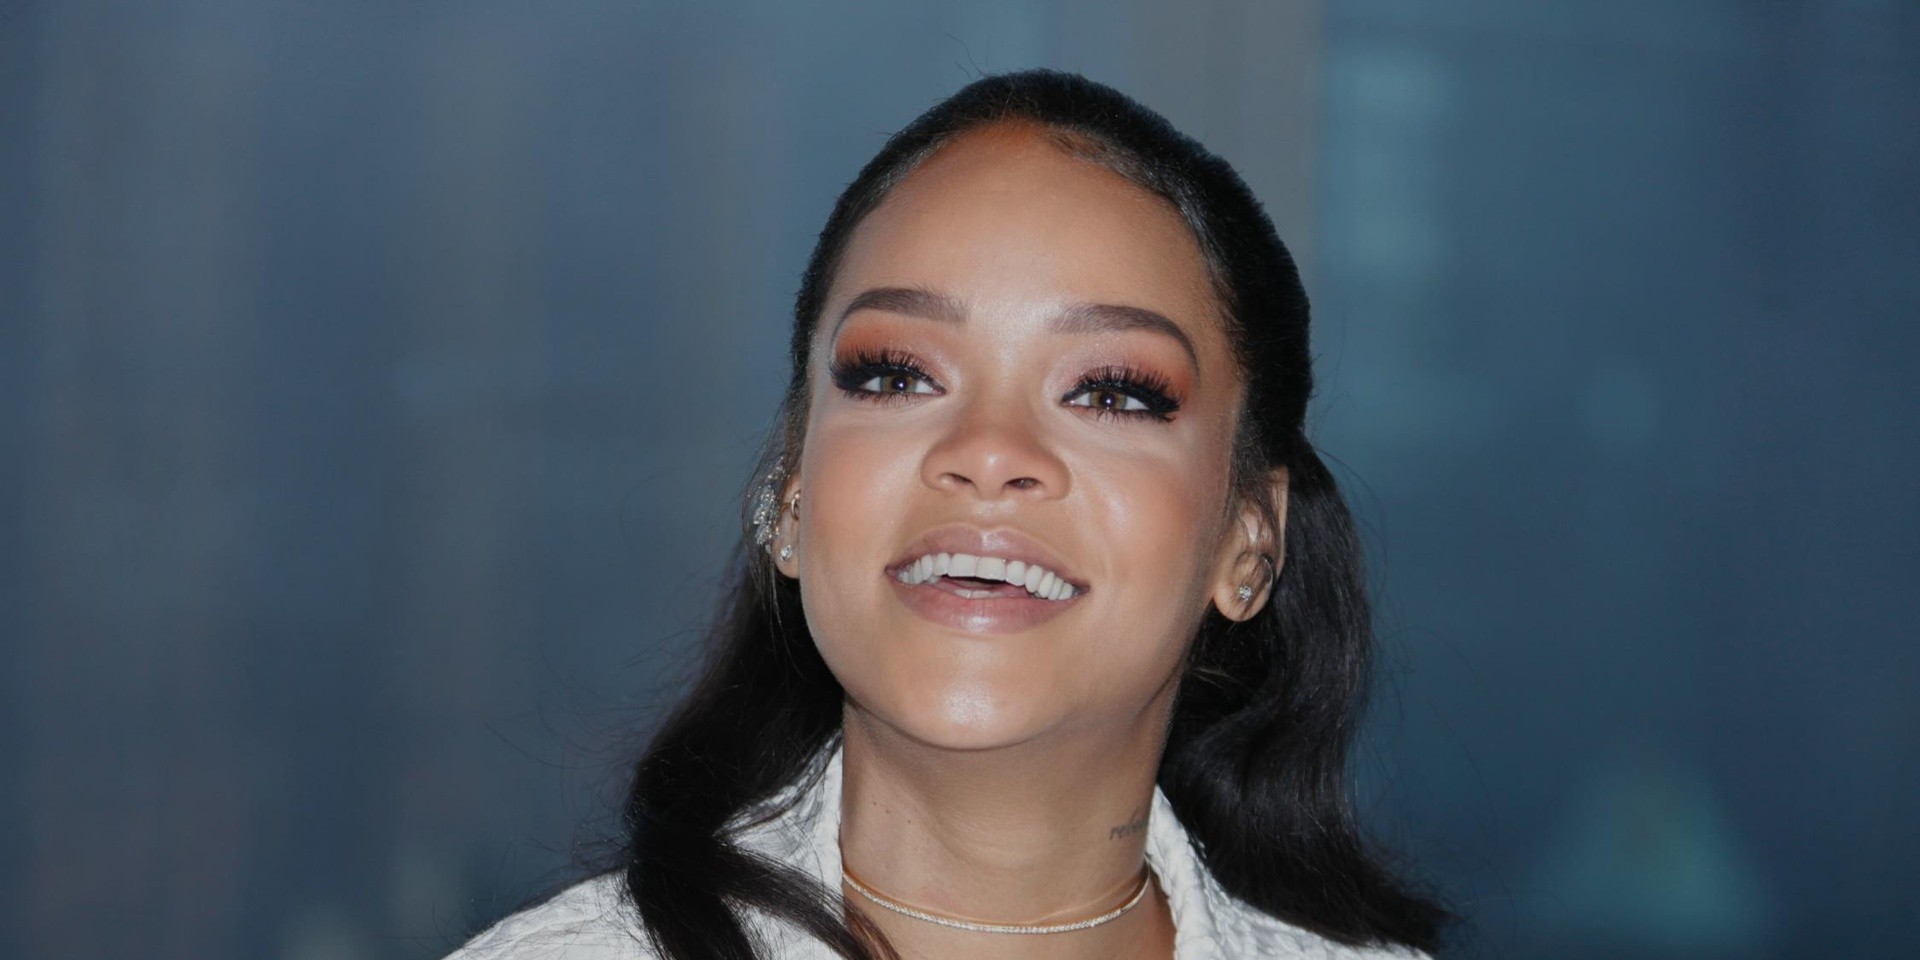 Rihanna will release a self-titled book that includes over 1000 photographs